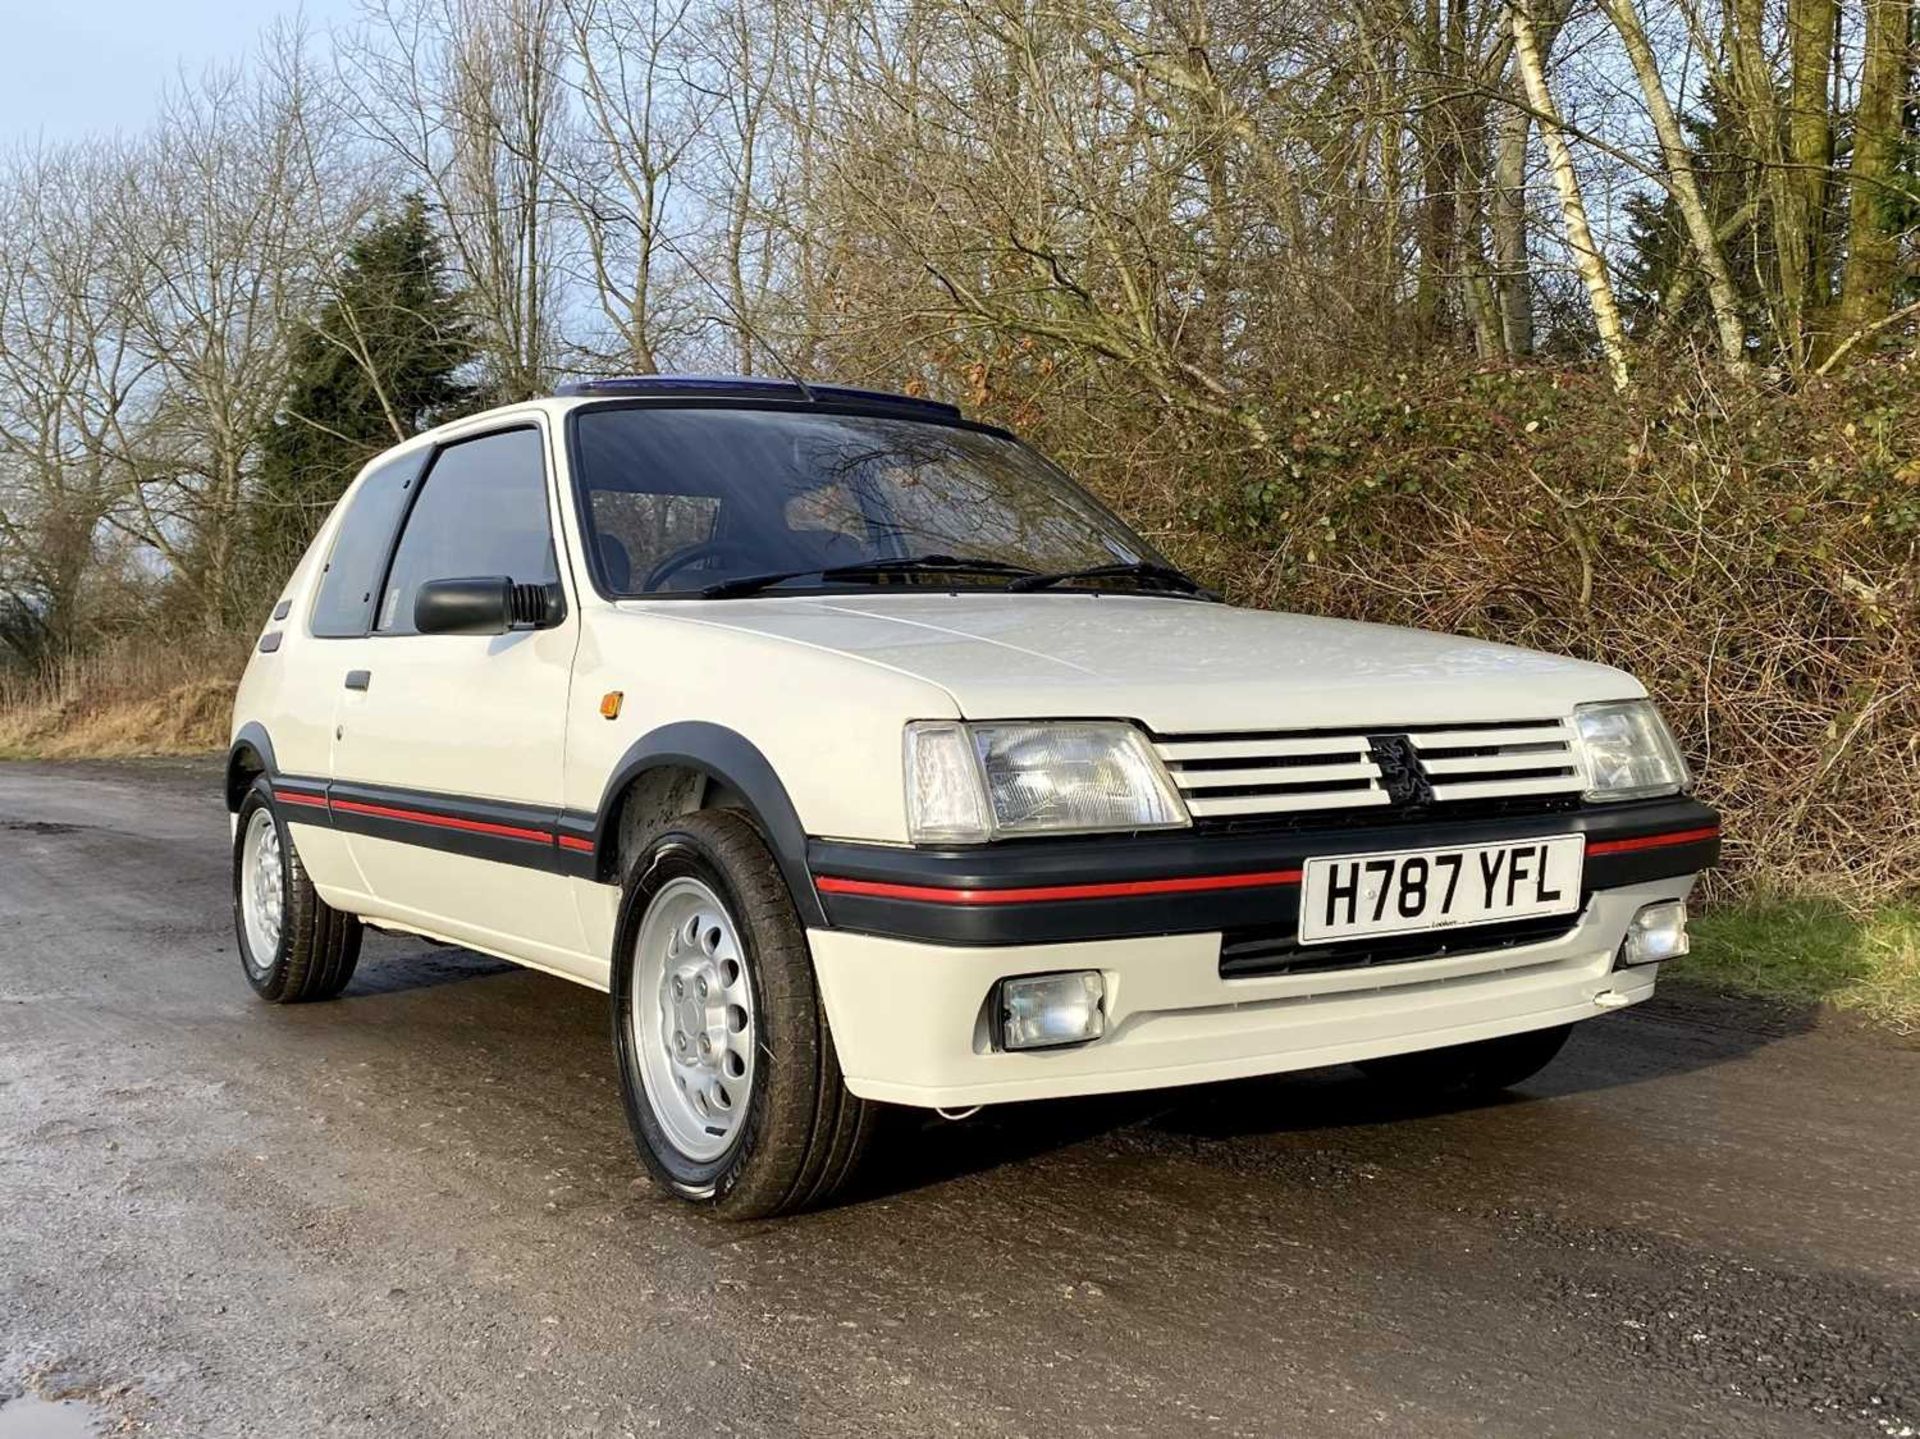 1990 Peugeot 205 GTi 1.6 Only 56,000 miles, same owner for 16 years